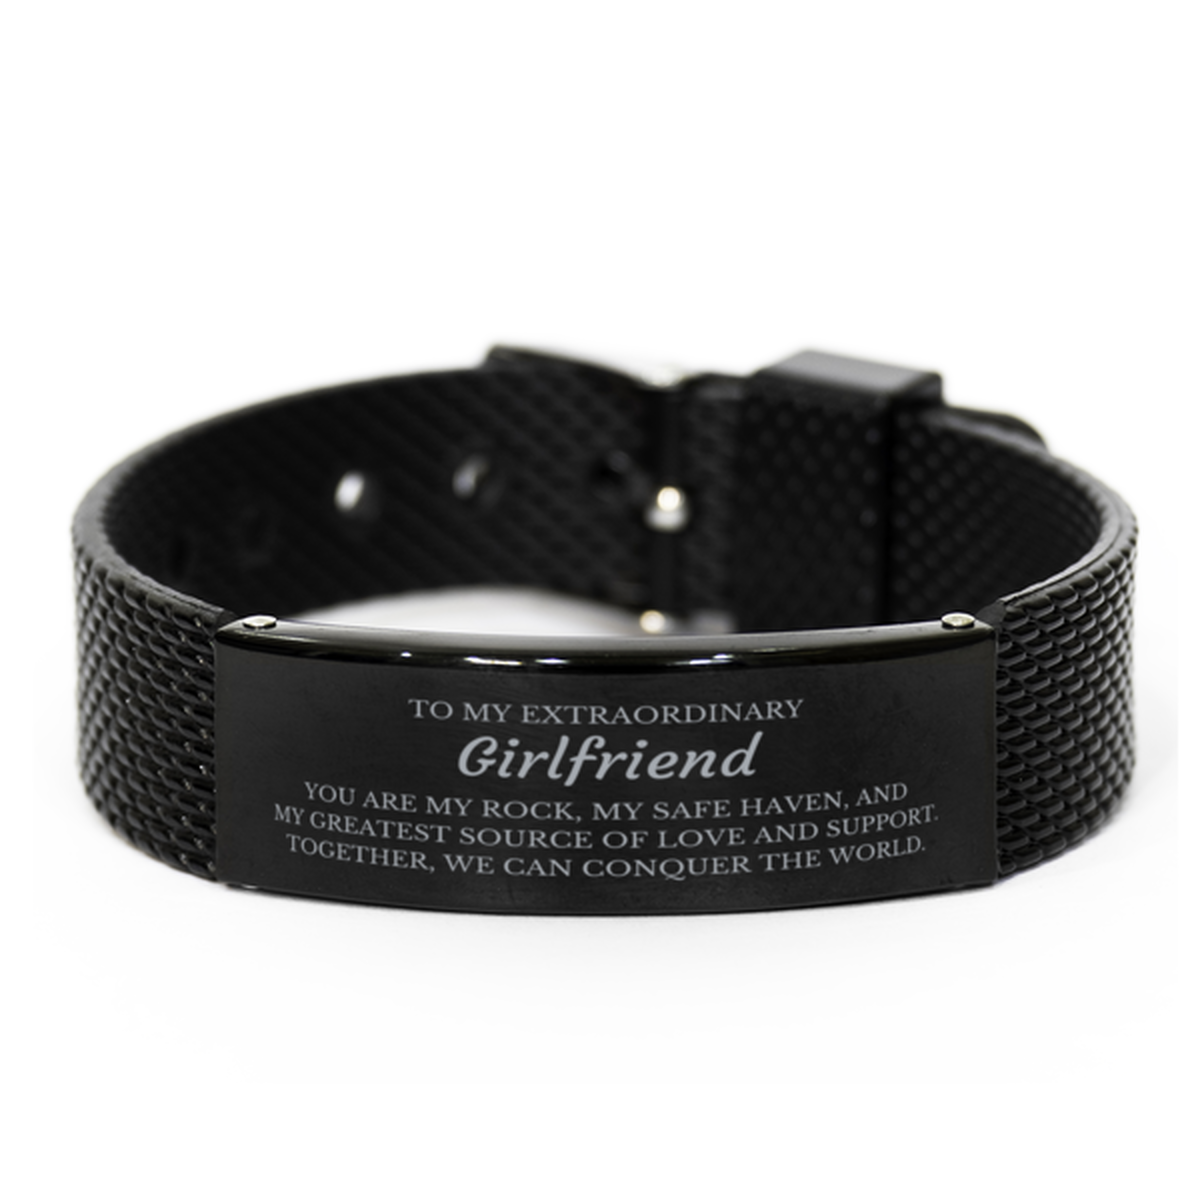 To My Extraordinary Girlfriend Gifts, Together, we can conquer the world, Birthday Black Shark Mesh Bracelet For Girlfriend, Christmas Gifts For Girlfriend